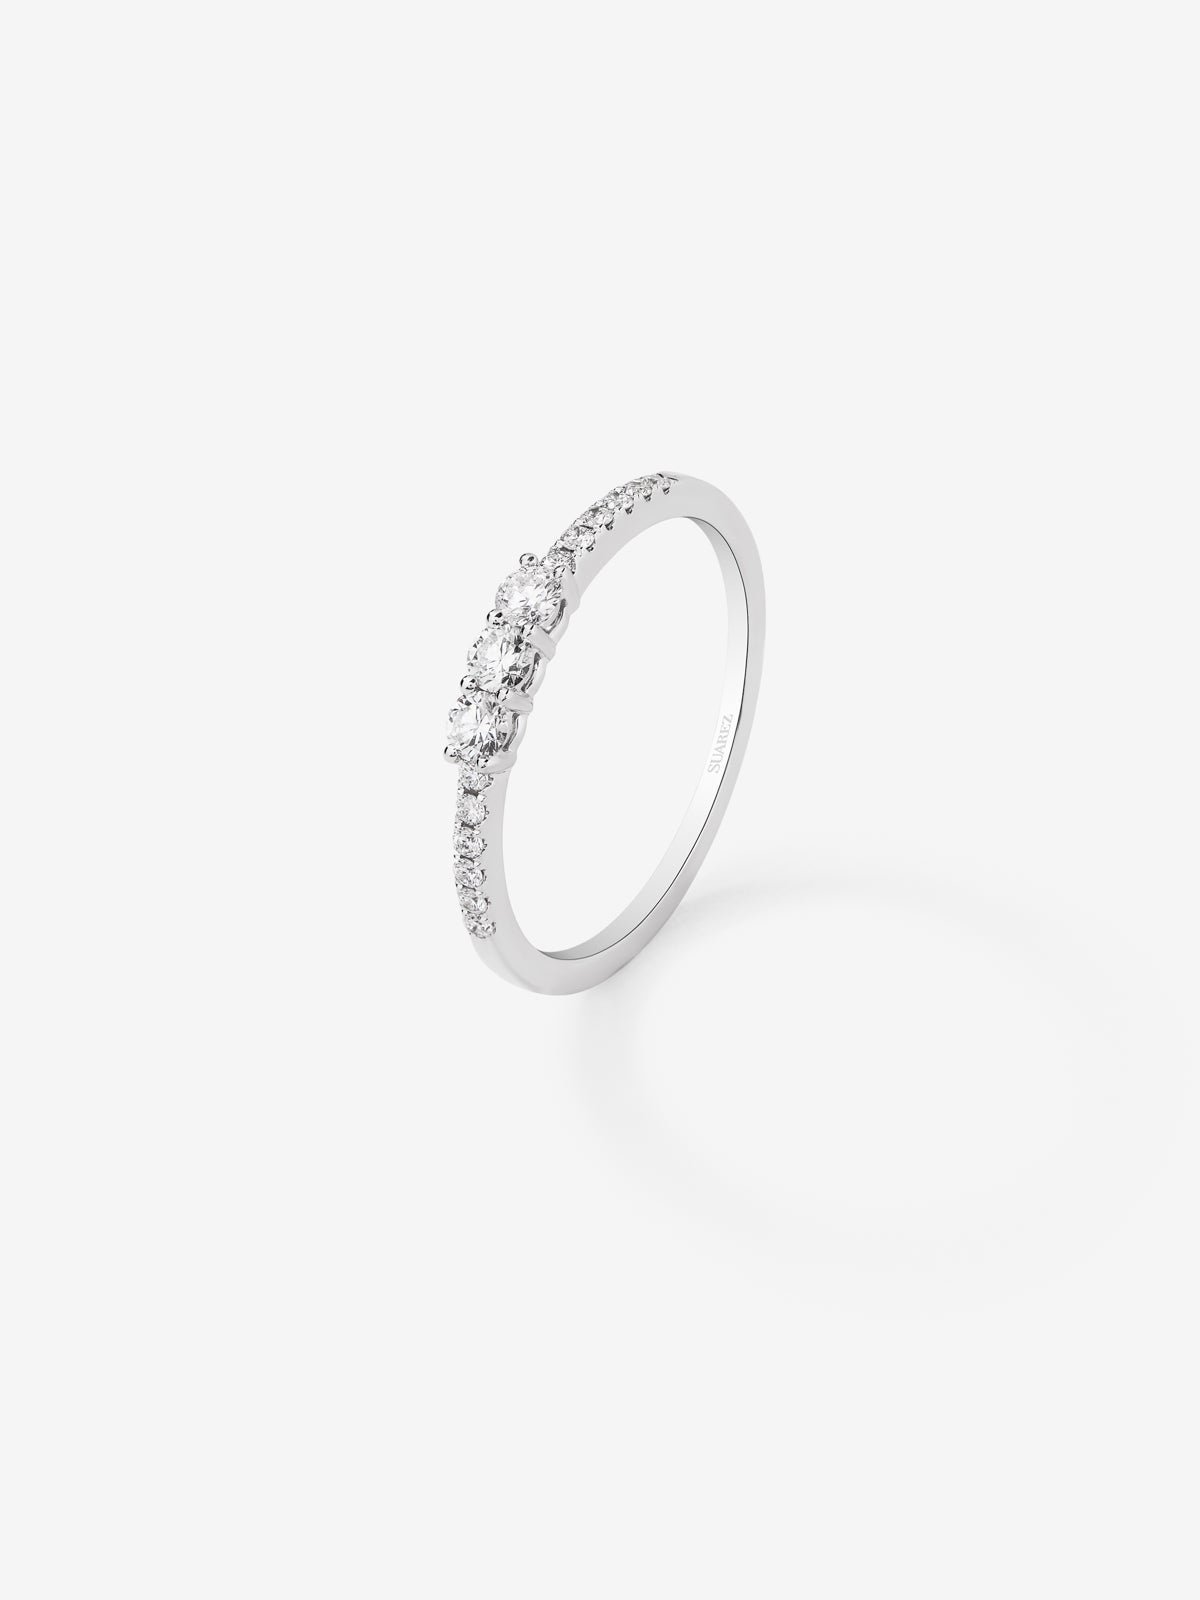 18K white gold triple ring with 3 central brilliant-cut diamonds with a total of 0.19 cts and an arm of 12 brilliant-cut diamonds with a total of 0.09 cts